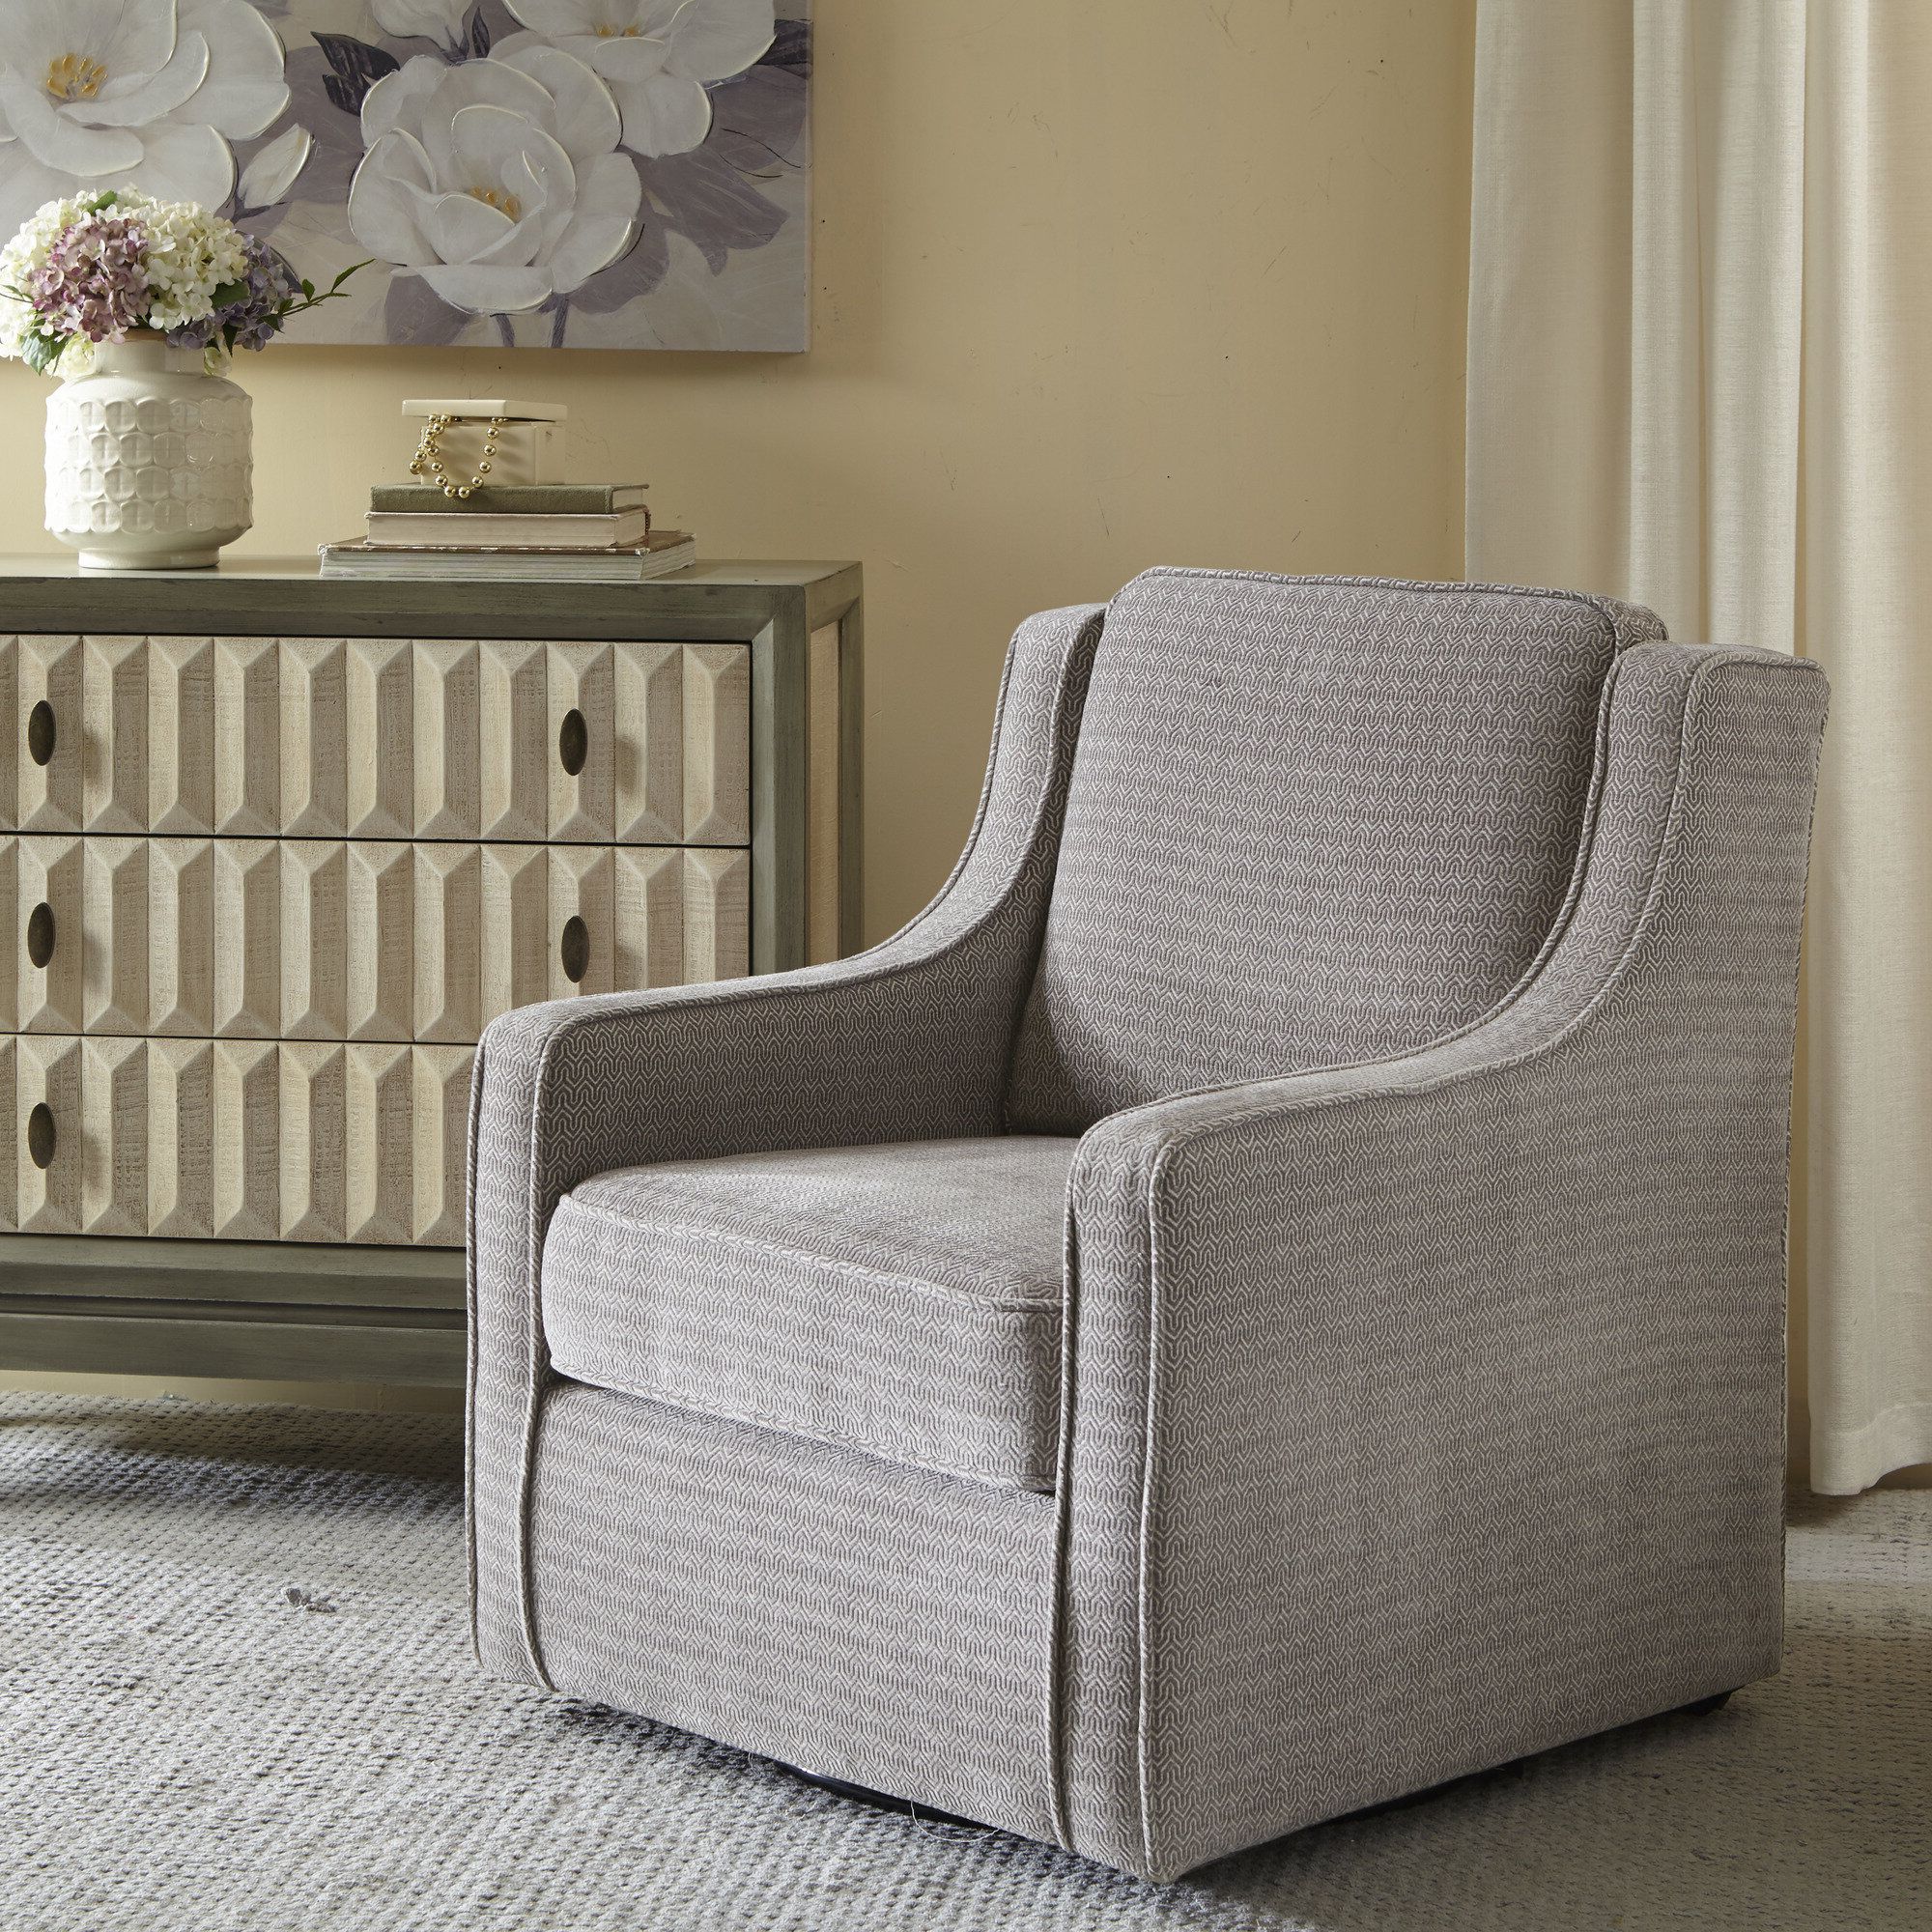 2019 Vineland Polyester Swivel Armchairs Throughout Vineland  (View 1 of 20)